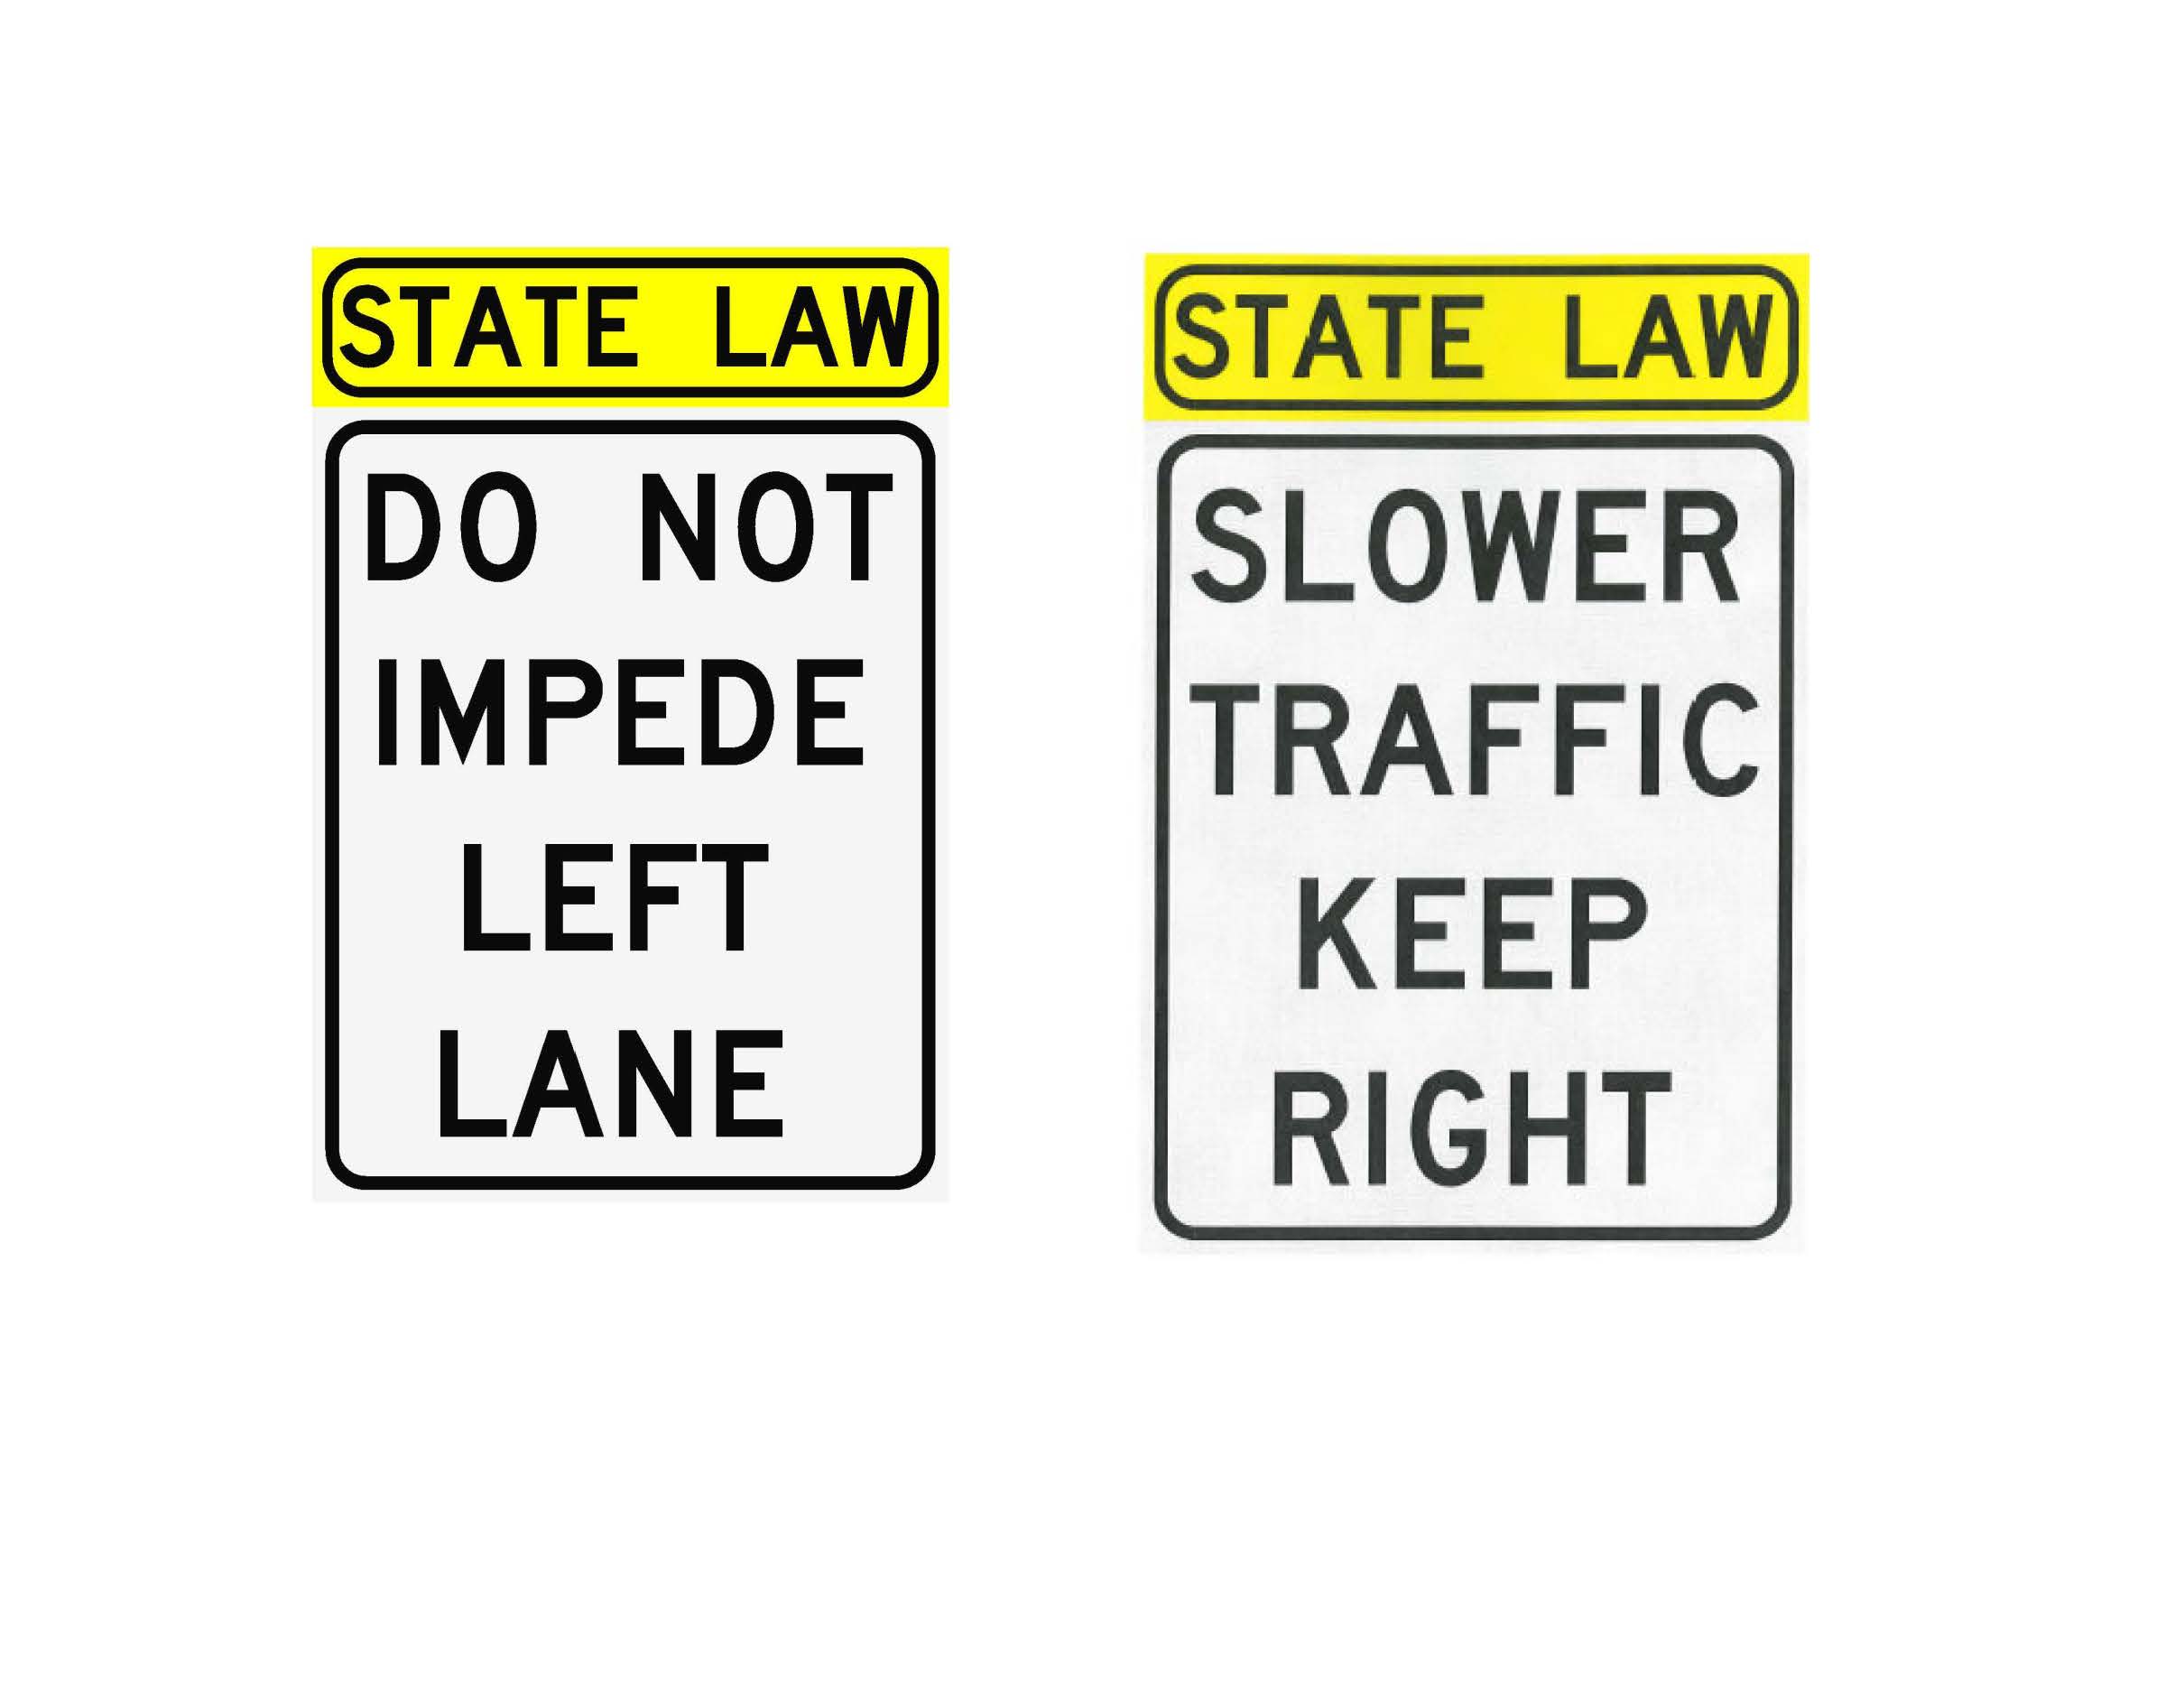 New Oklahoma law reserves left lane only for passing